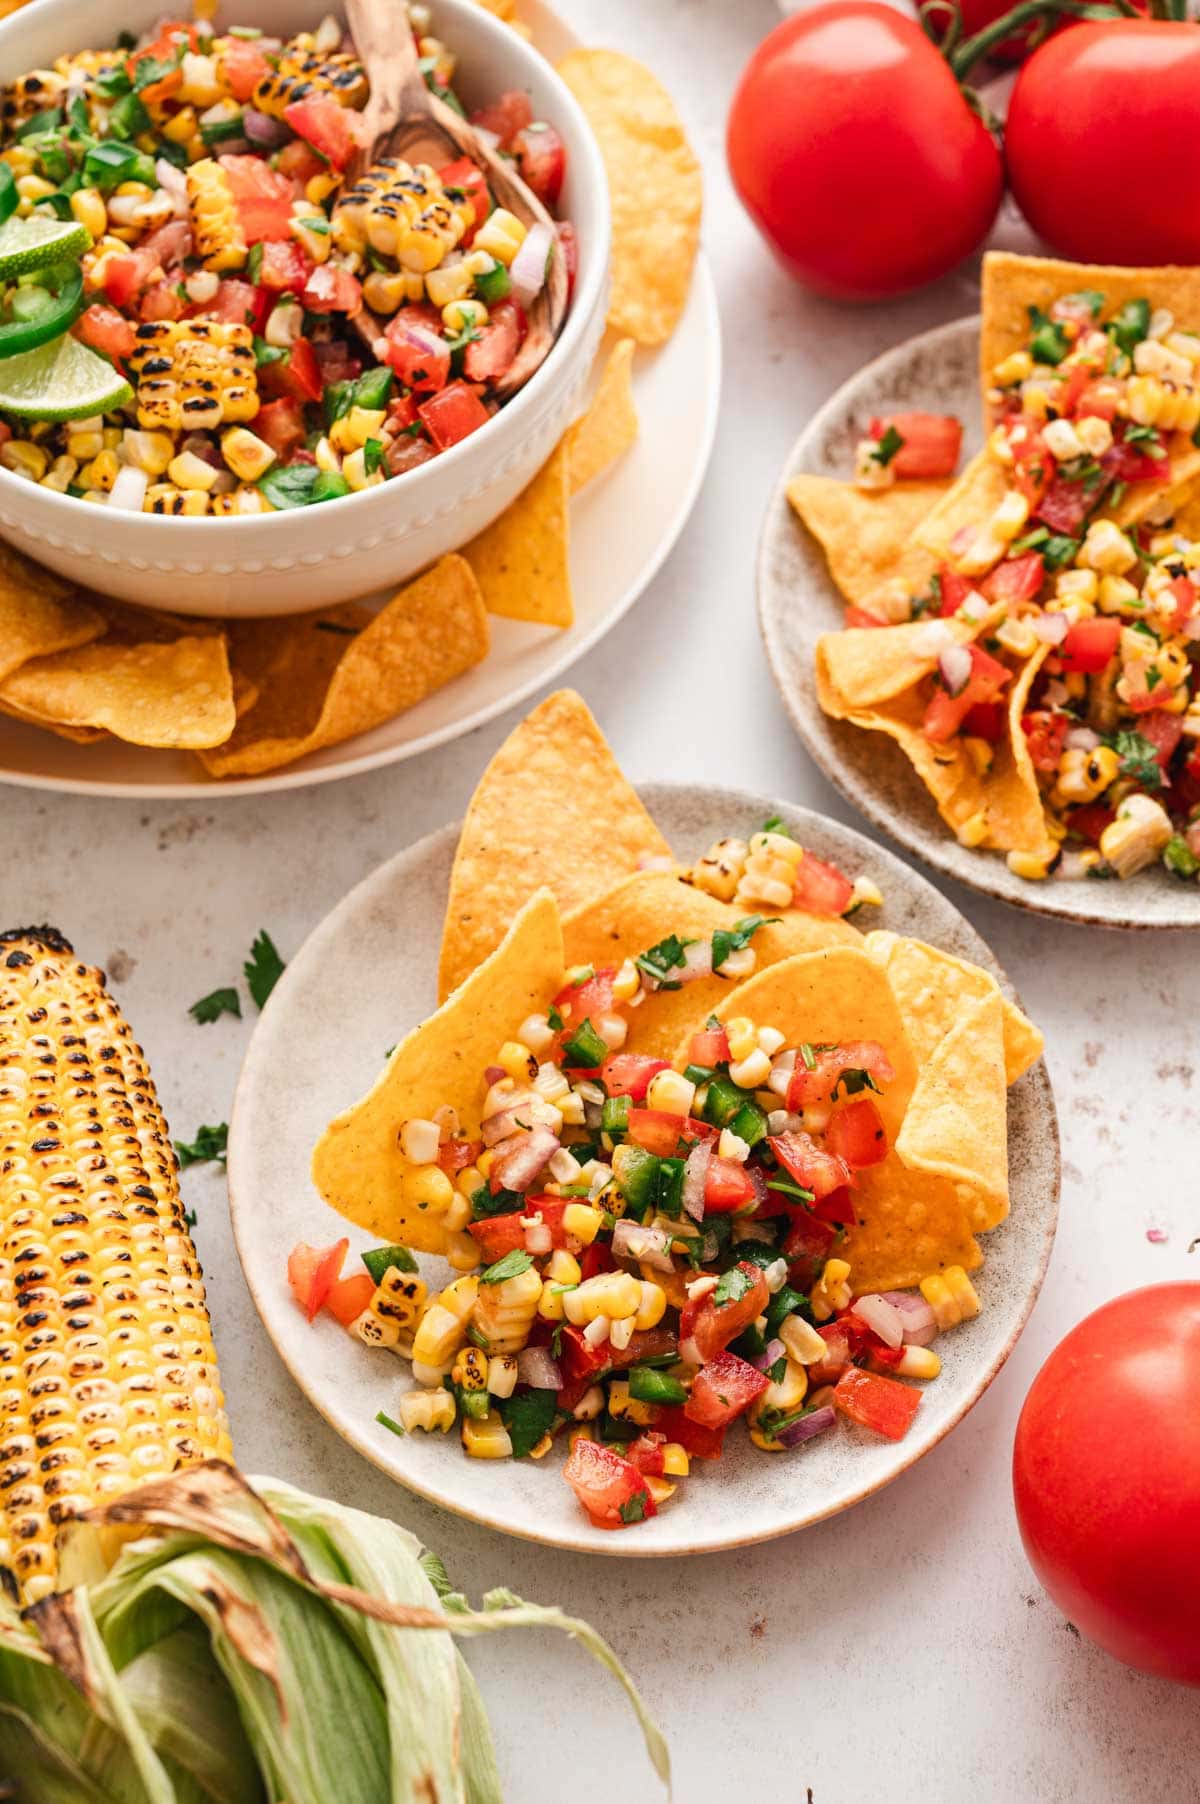 Corn salsa in a bowl and on small plates with tortilla chips.